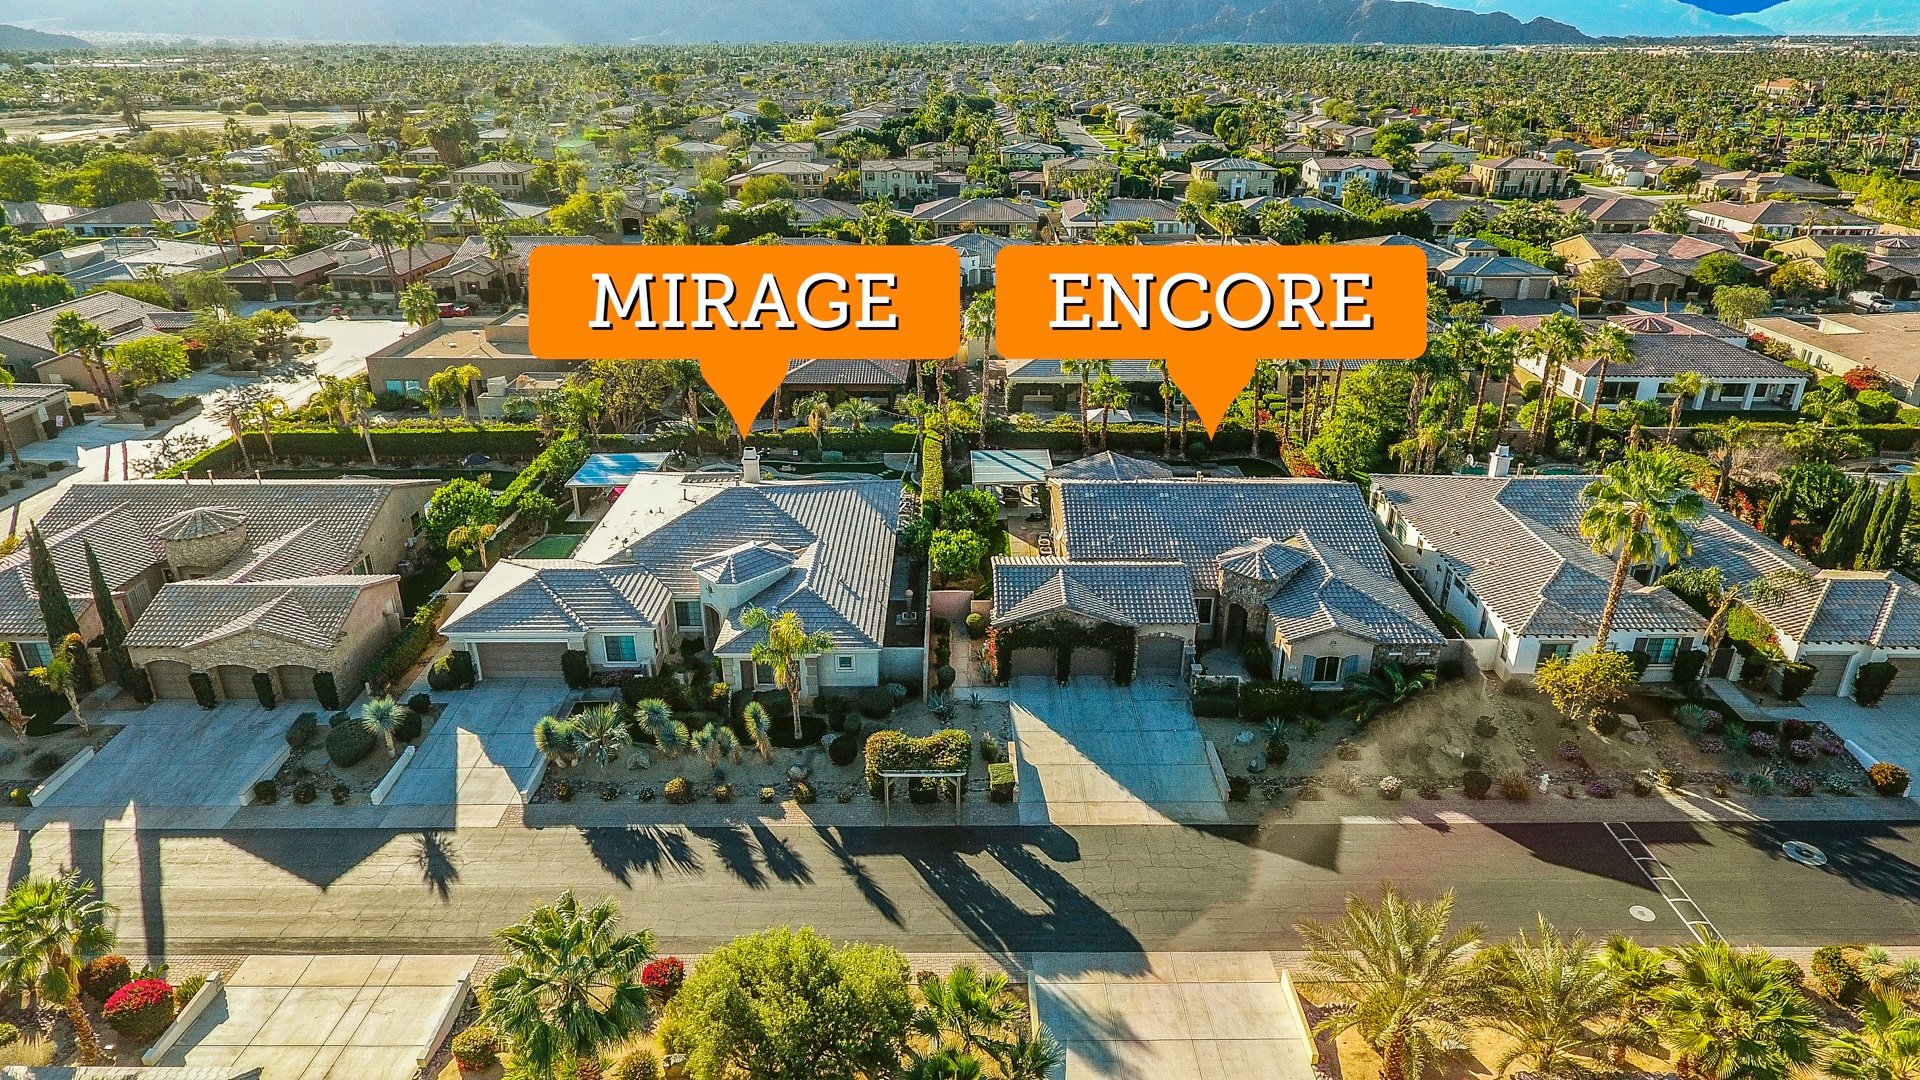 Vacay Stay represents Mirage and Encore right next door to each other for larger gatherings that need 2 houses